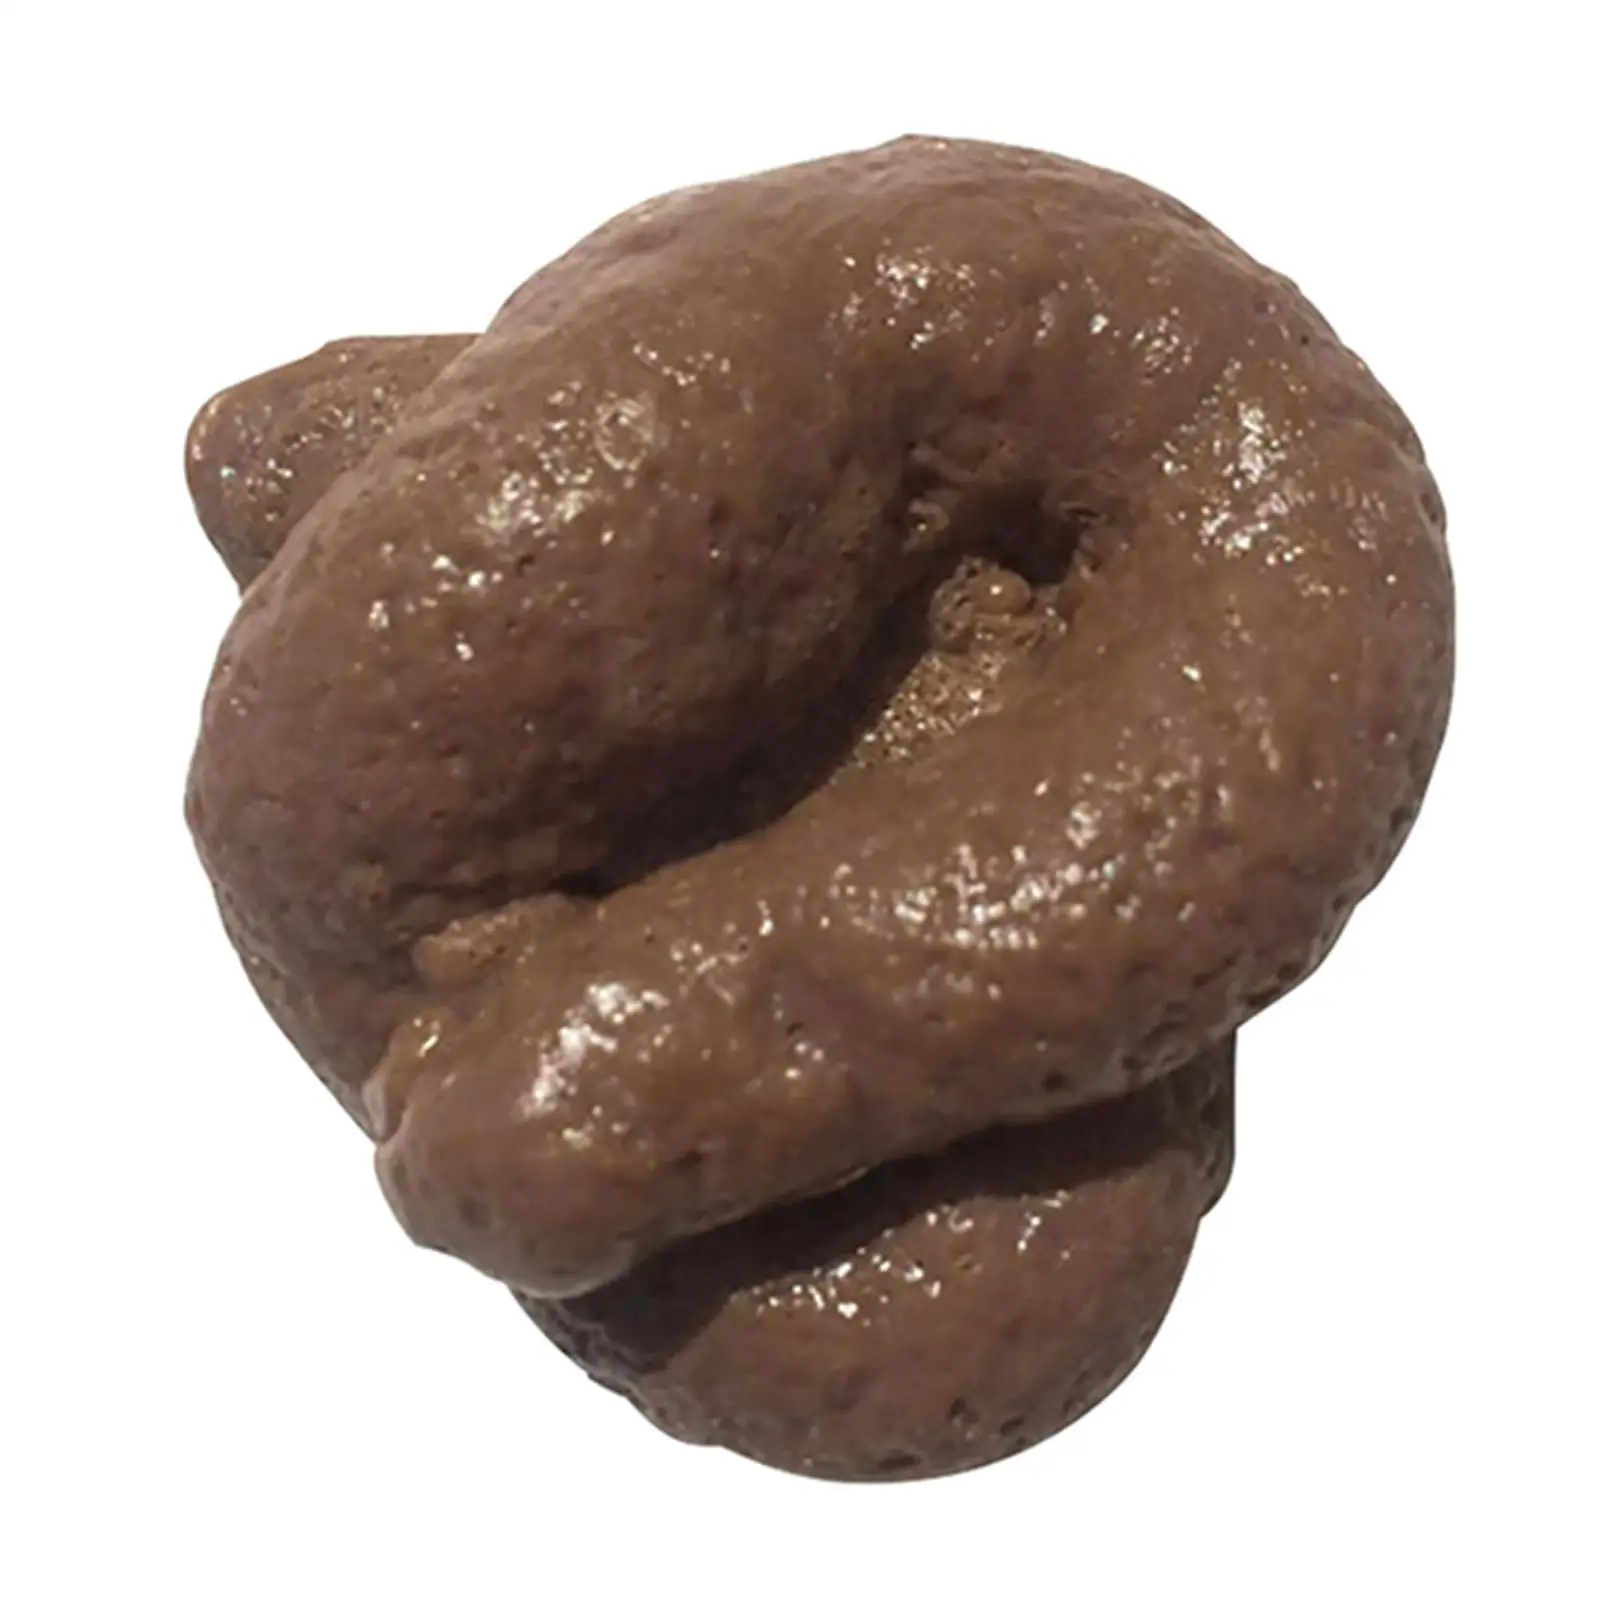 

Prank Fake Poop Funny Toys Realistic Shit Disgusting Party Tricky Stool Mischief Day Gifts April Toys Turd Fools Simulation